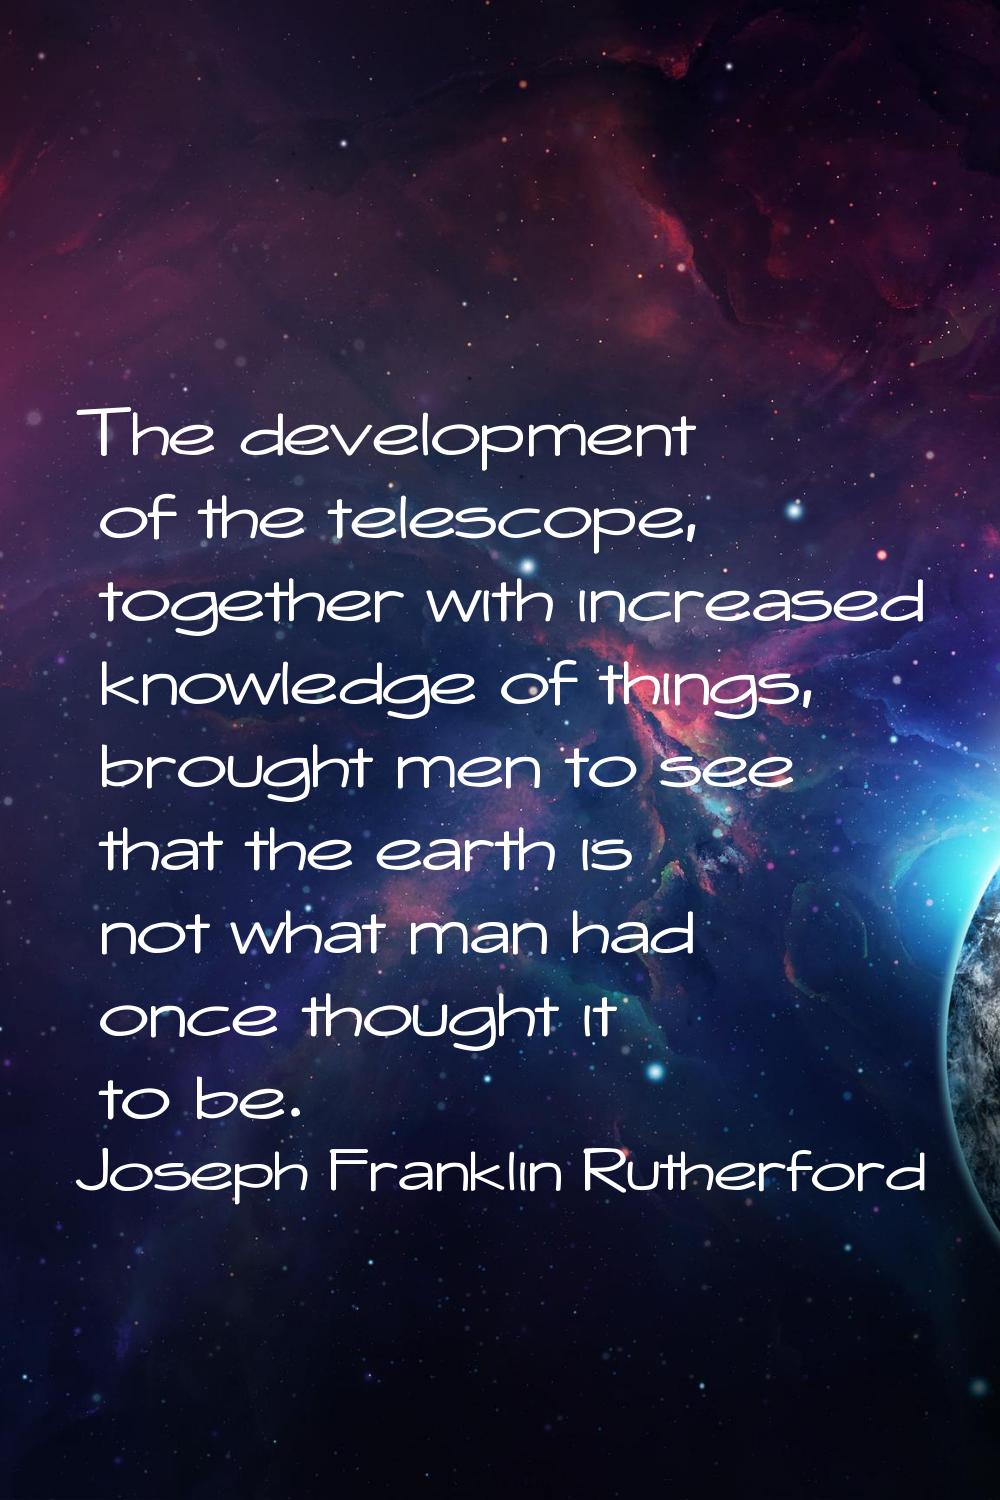 The development of the telescope, together with increased knowledge of things, brought men to see t